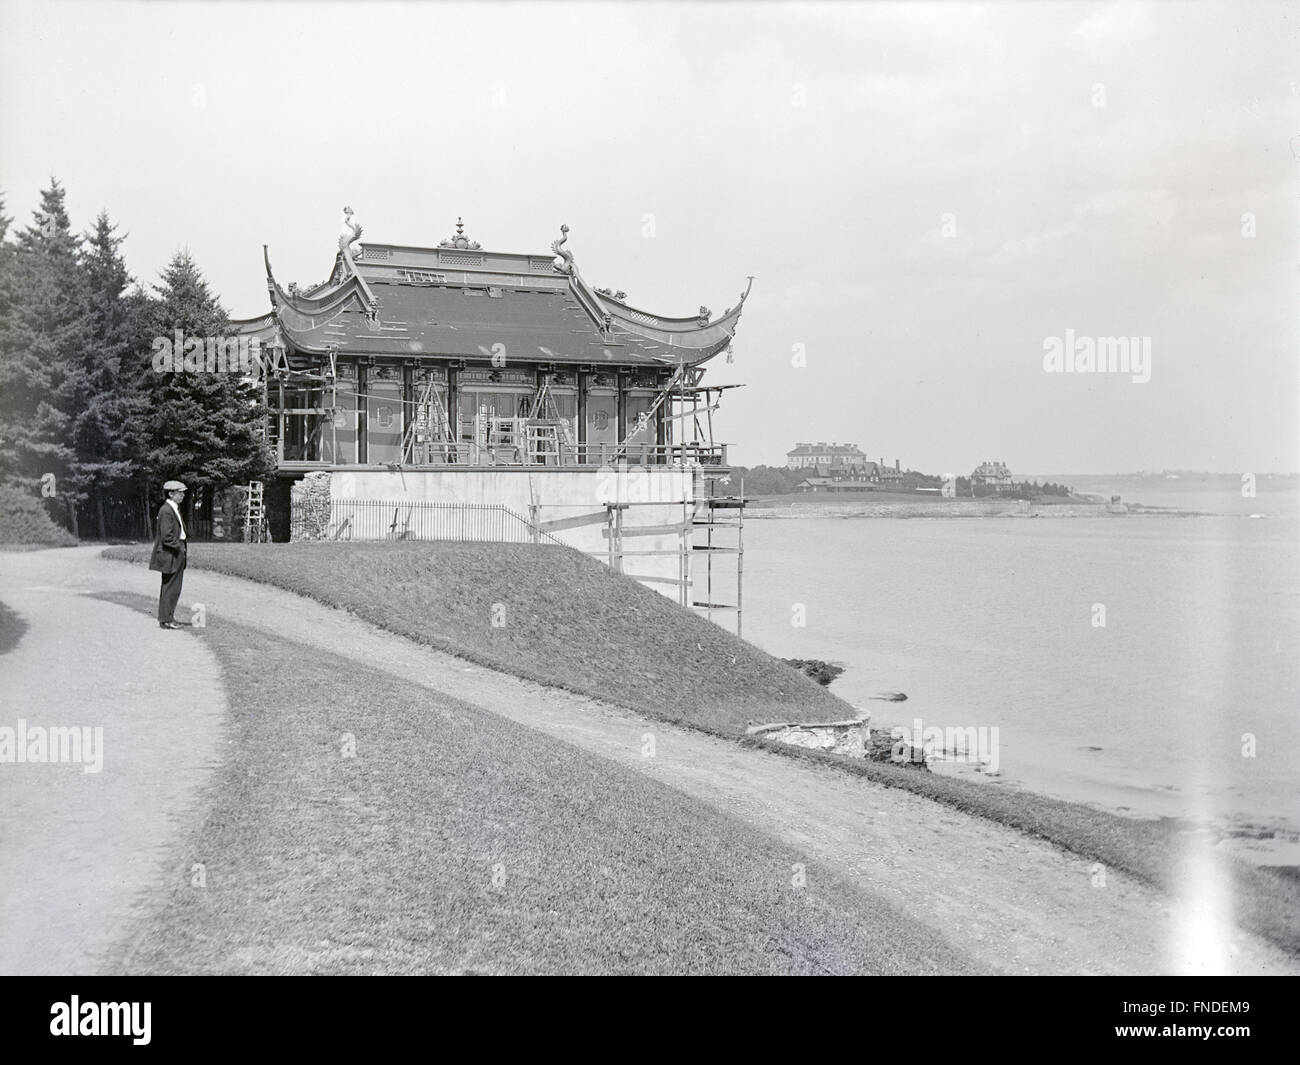 Antique c1912 photograph, the Chinese Tea House at Marble House in Newport, Rhode Island, built by Alva Vanderbilt Belmont in 1912. SOURCE: ORIGINAL PHOTOGRAPHIC NEGATIVE. Stock Photo